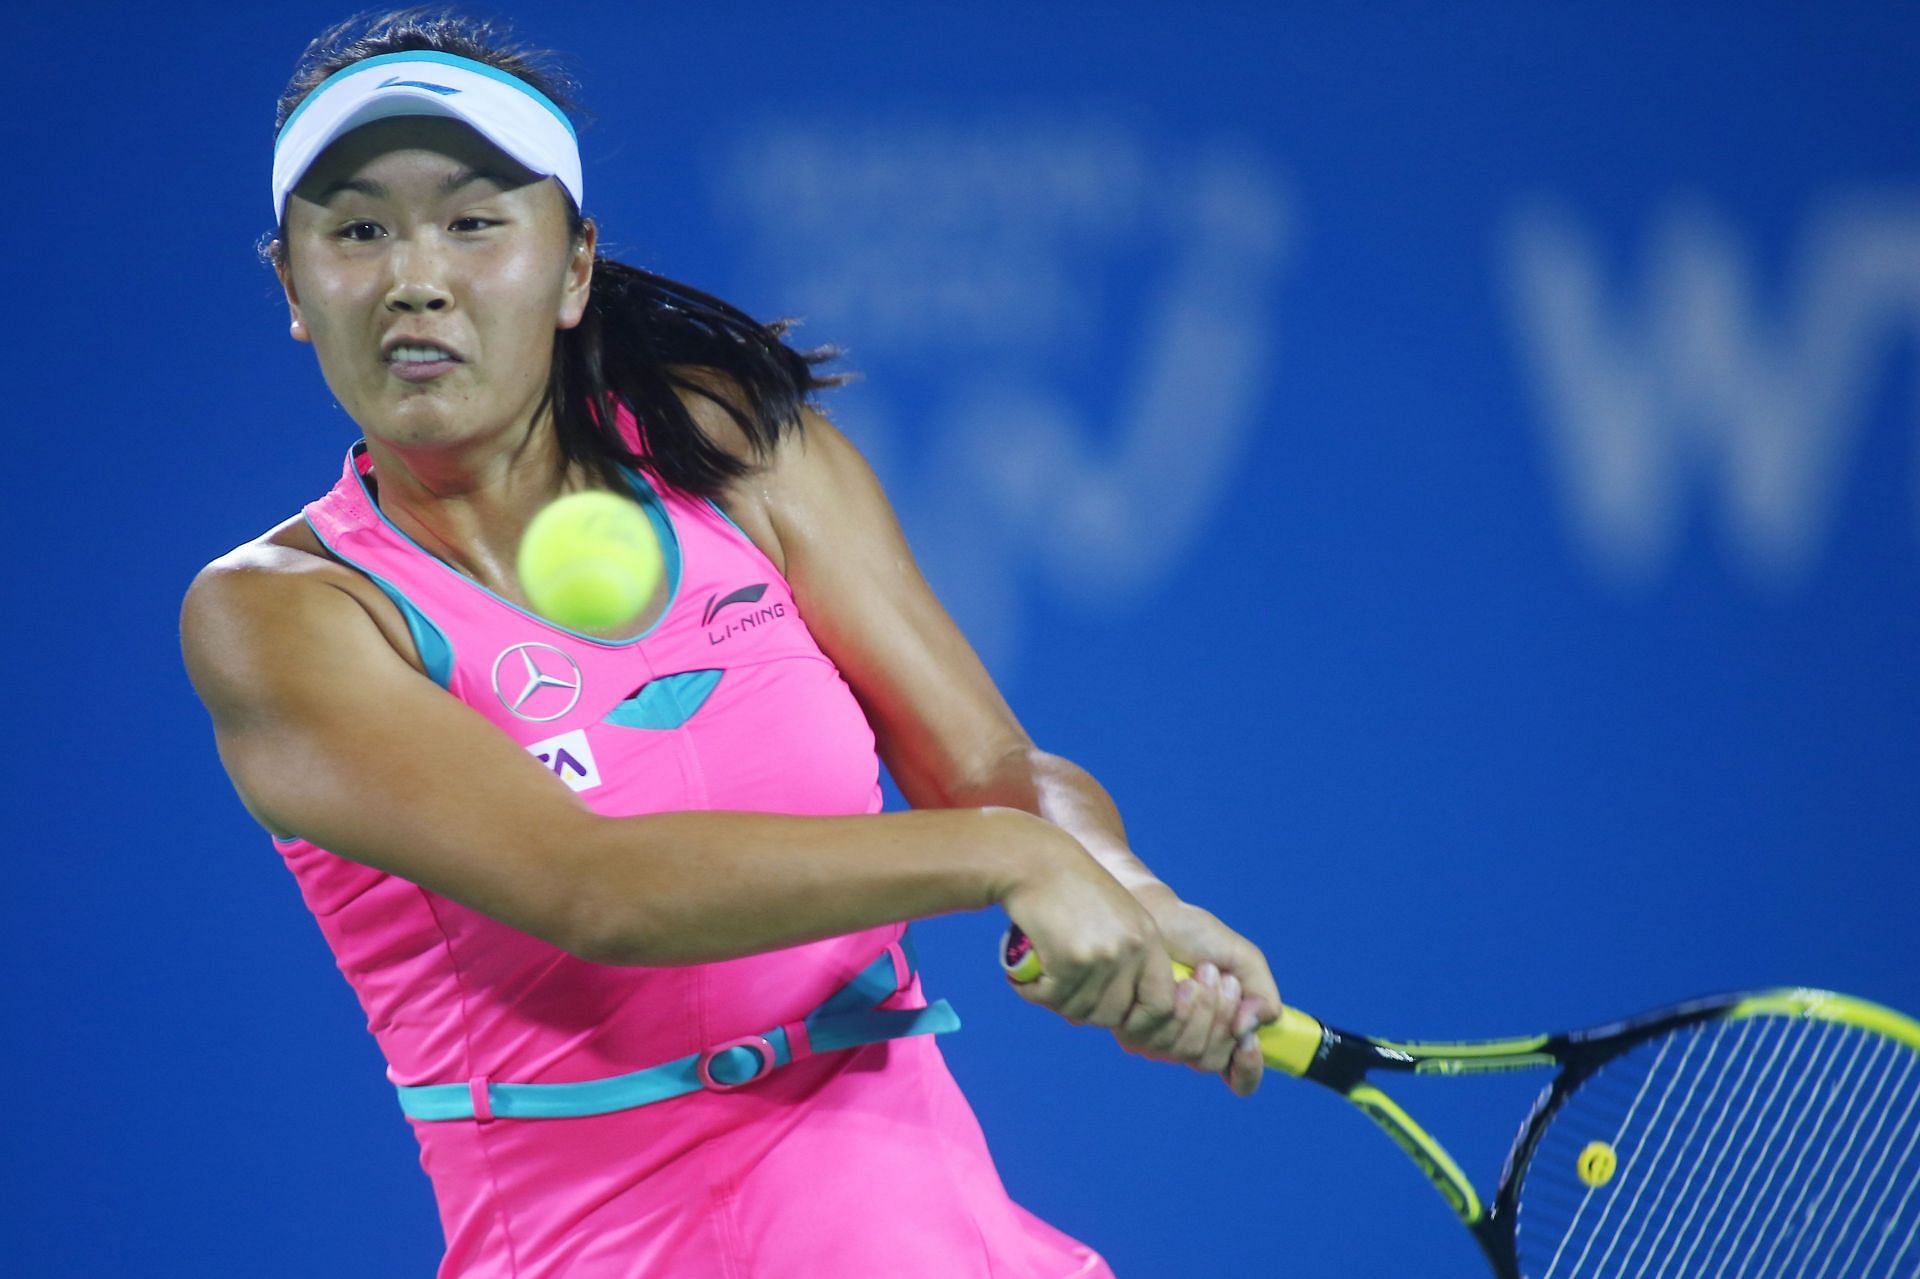 The CTA criticised the WTA for using Peng Shuai to politicize the sport